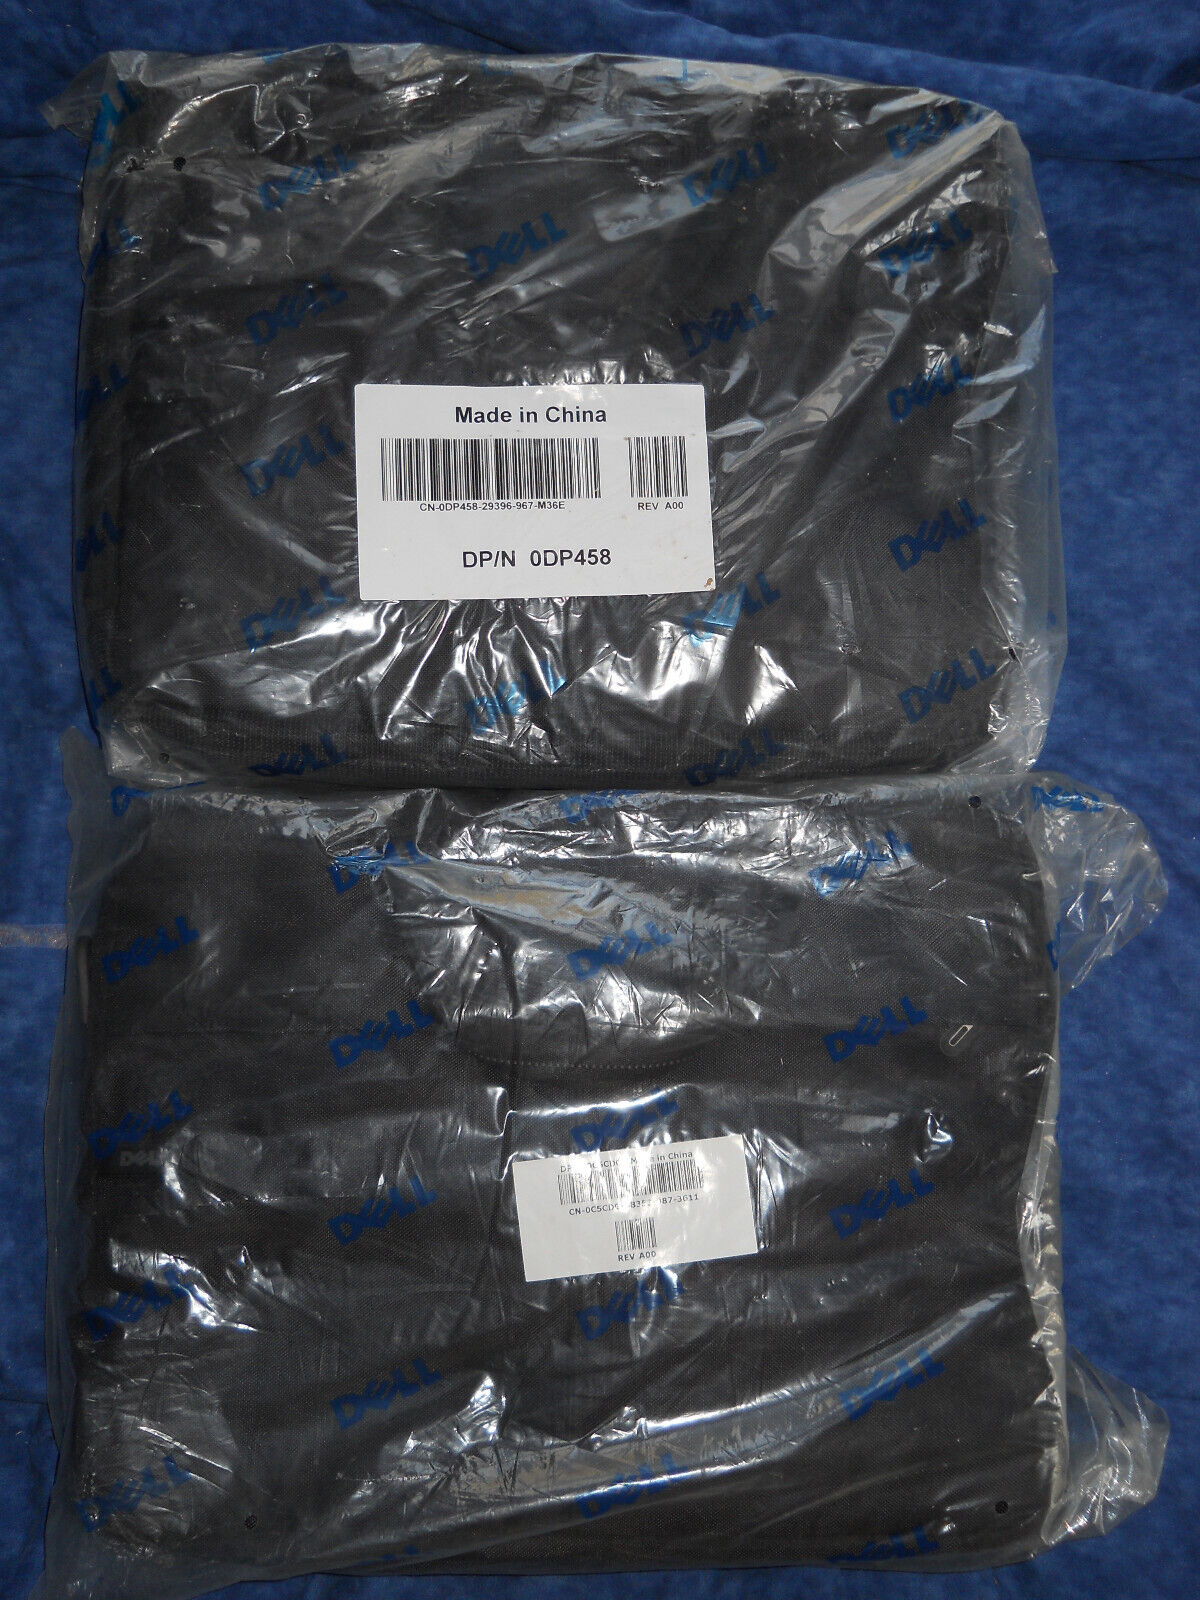 Dell Deluxe Laptop Bag Black Carrying Case Pair Set 0DP458 0C5CDG NEW SEALED